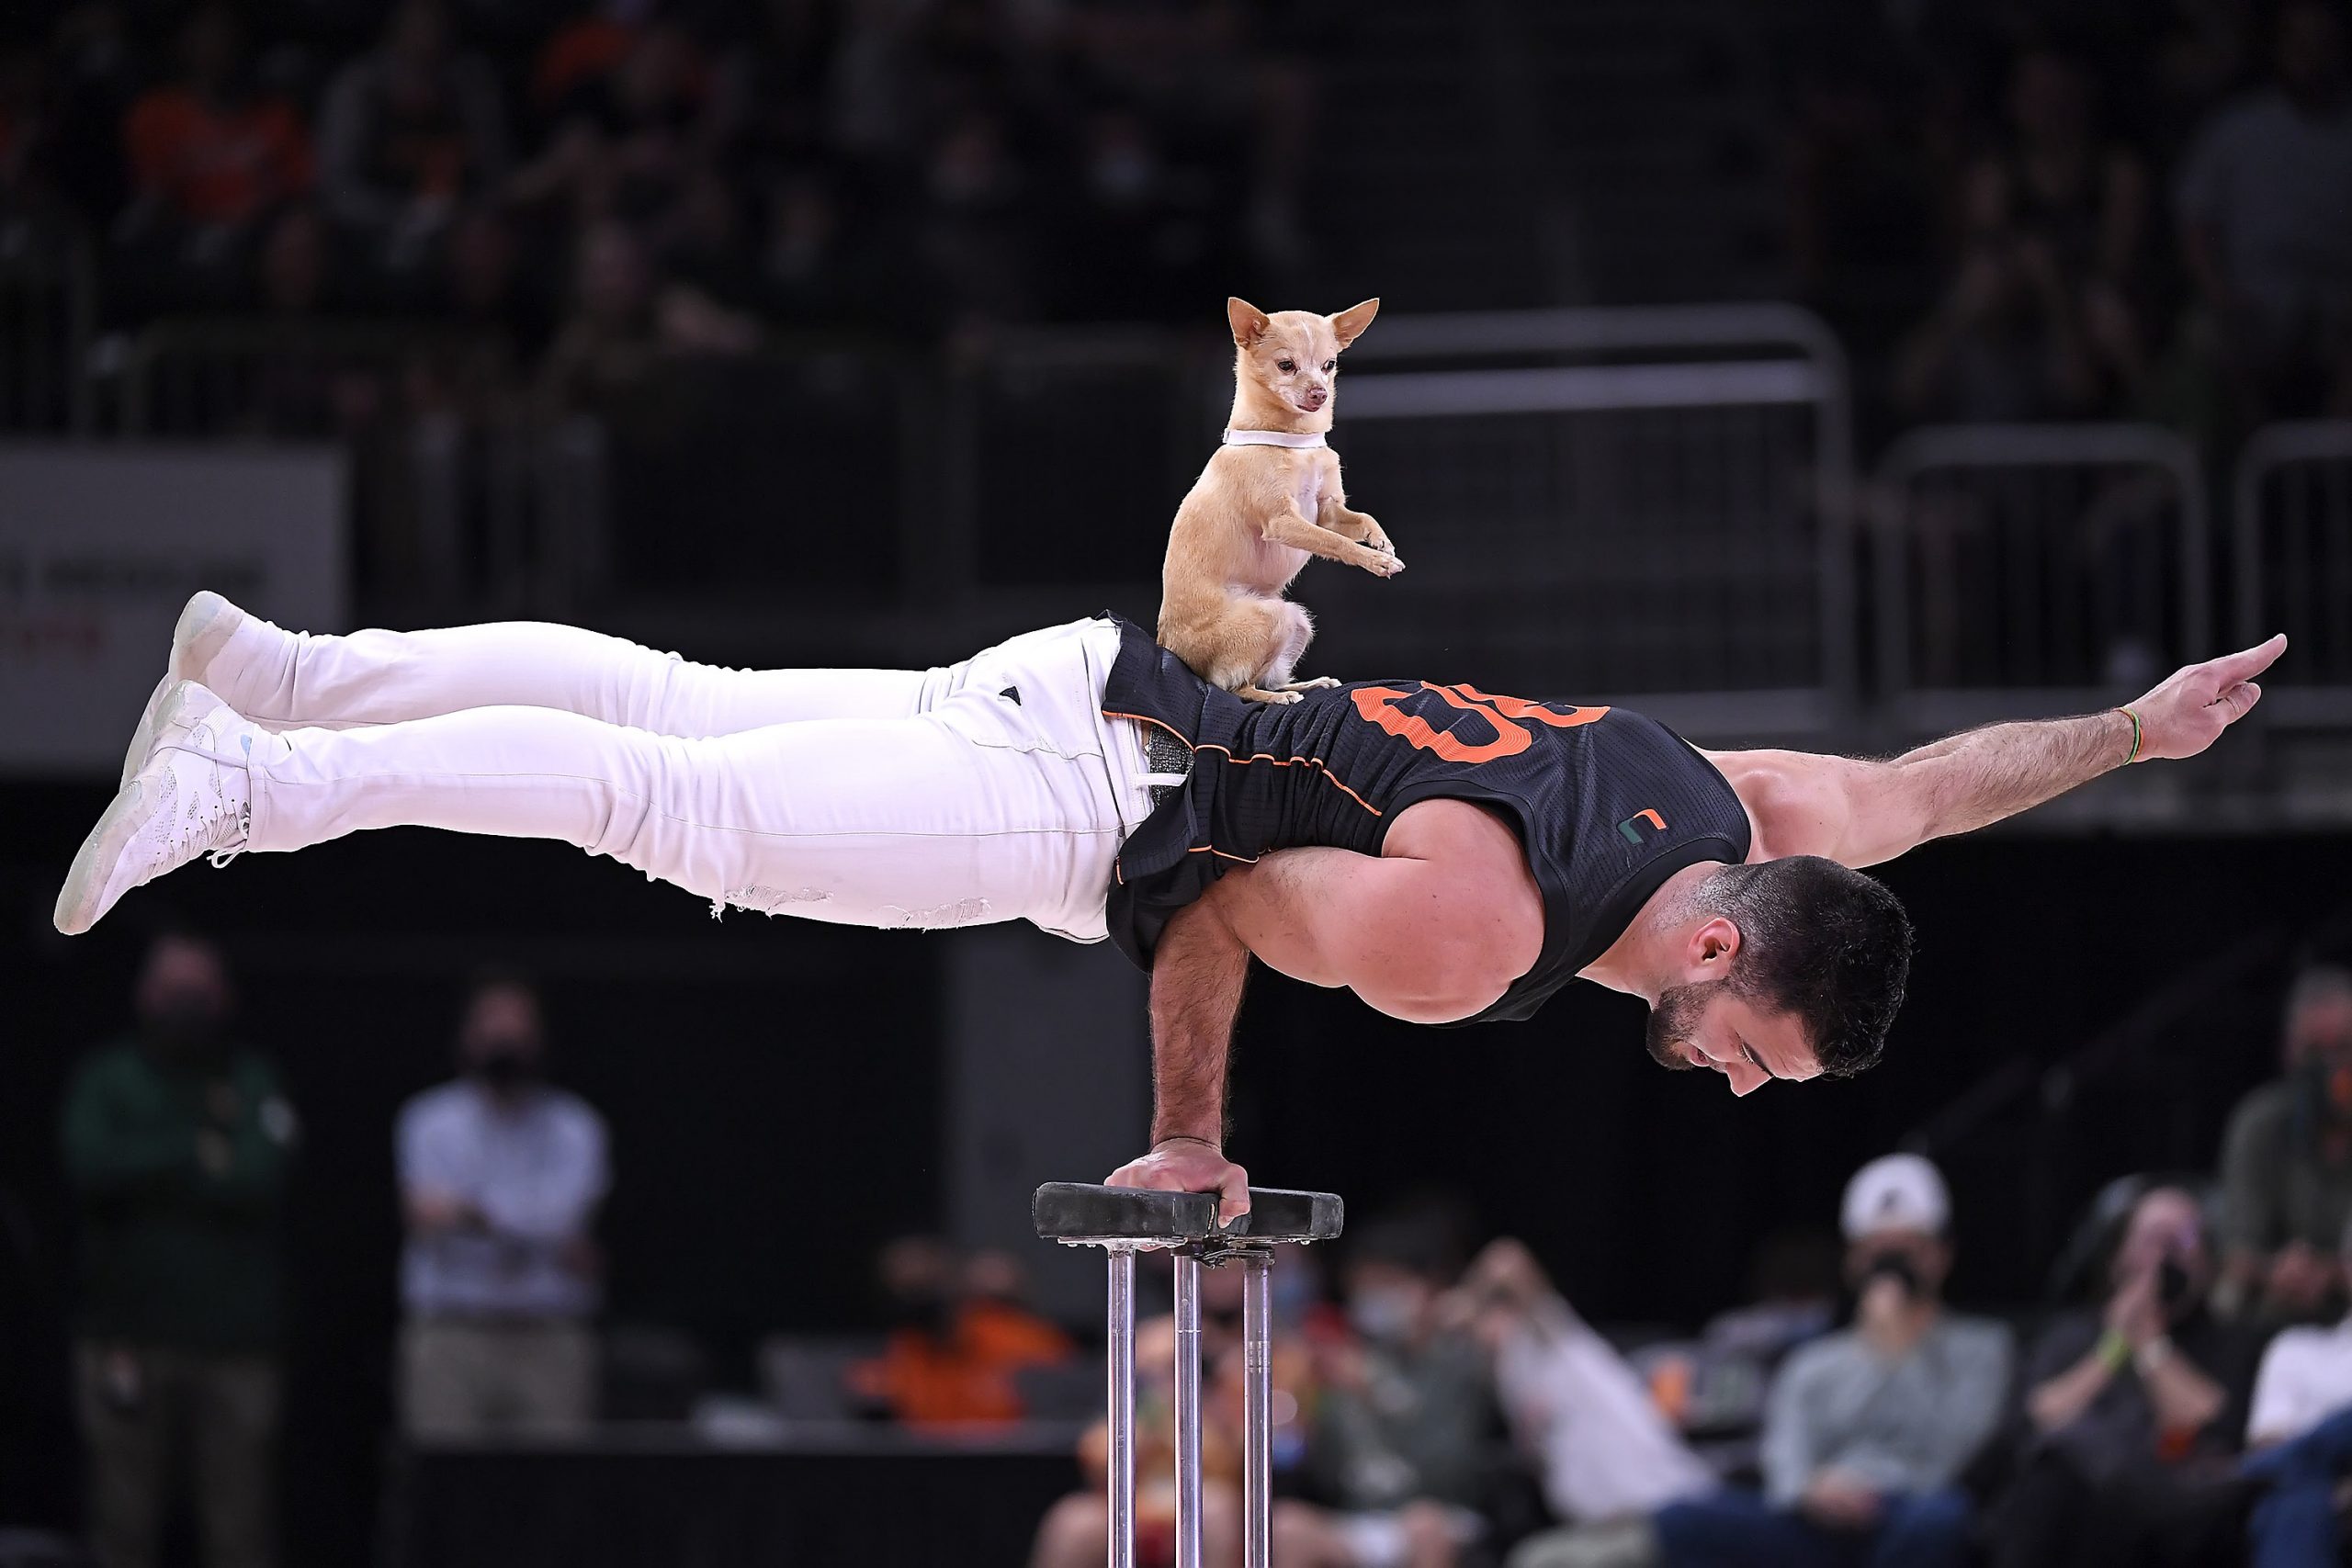 CORAL GABLES, FL - FEBRUARY 02: Christian and Scooby, a Chihuahua that can walk while balancing on basketballs, entertain the crowd at the half as the University of Miami Hurricanes faced the Notre Dame University Fighting Irish on February 2, 2022, at the Watsco Center in Coral Gables, Florida. (Photo by Samuel Lewis/Icon Sportswire) (Icon Sportswire via AP Images)